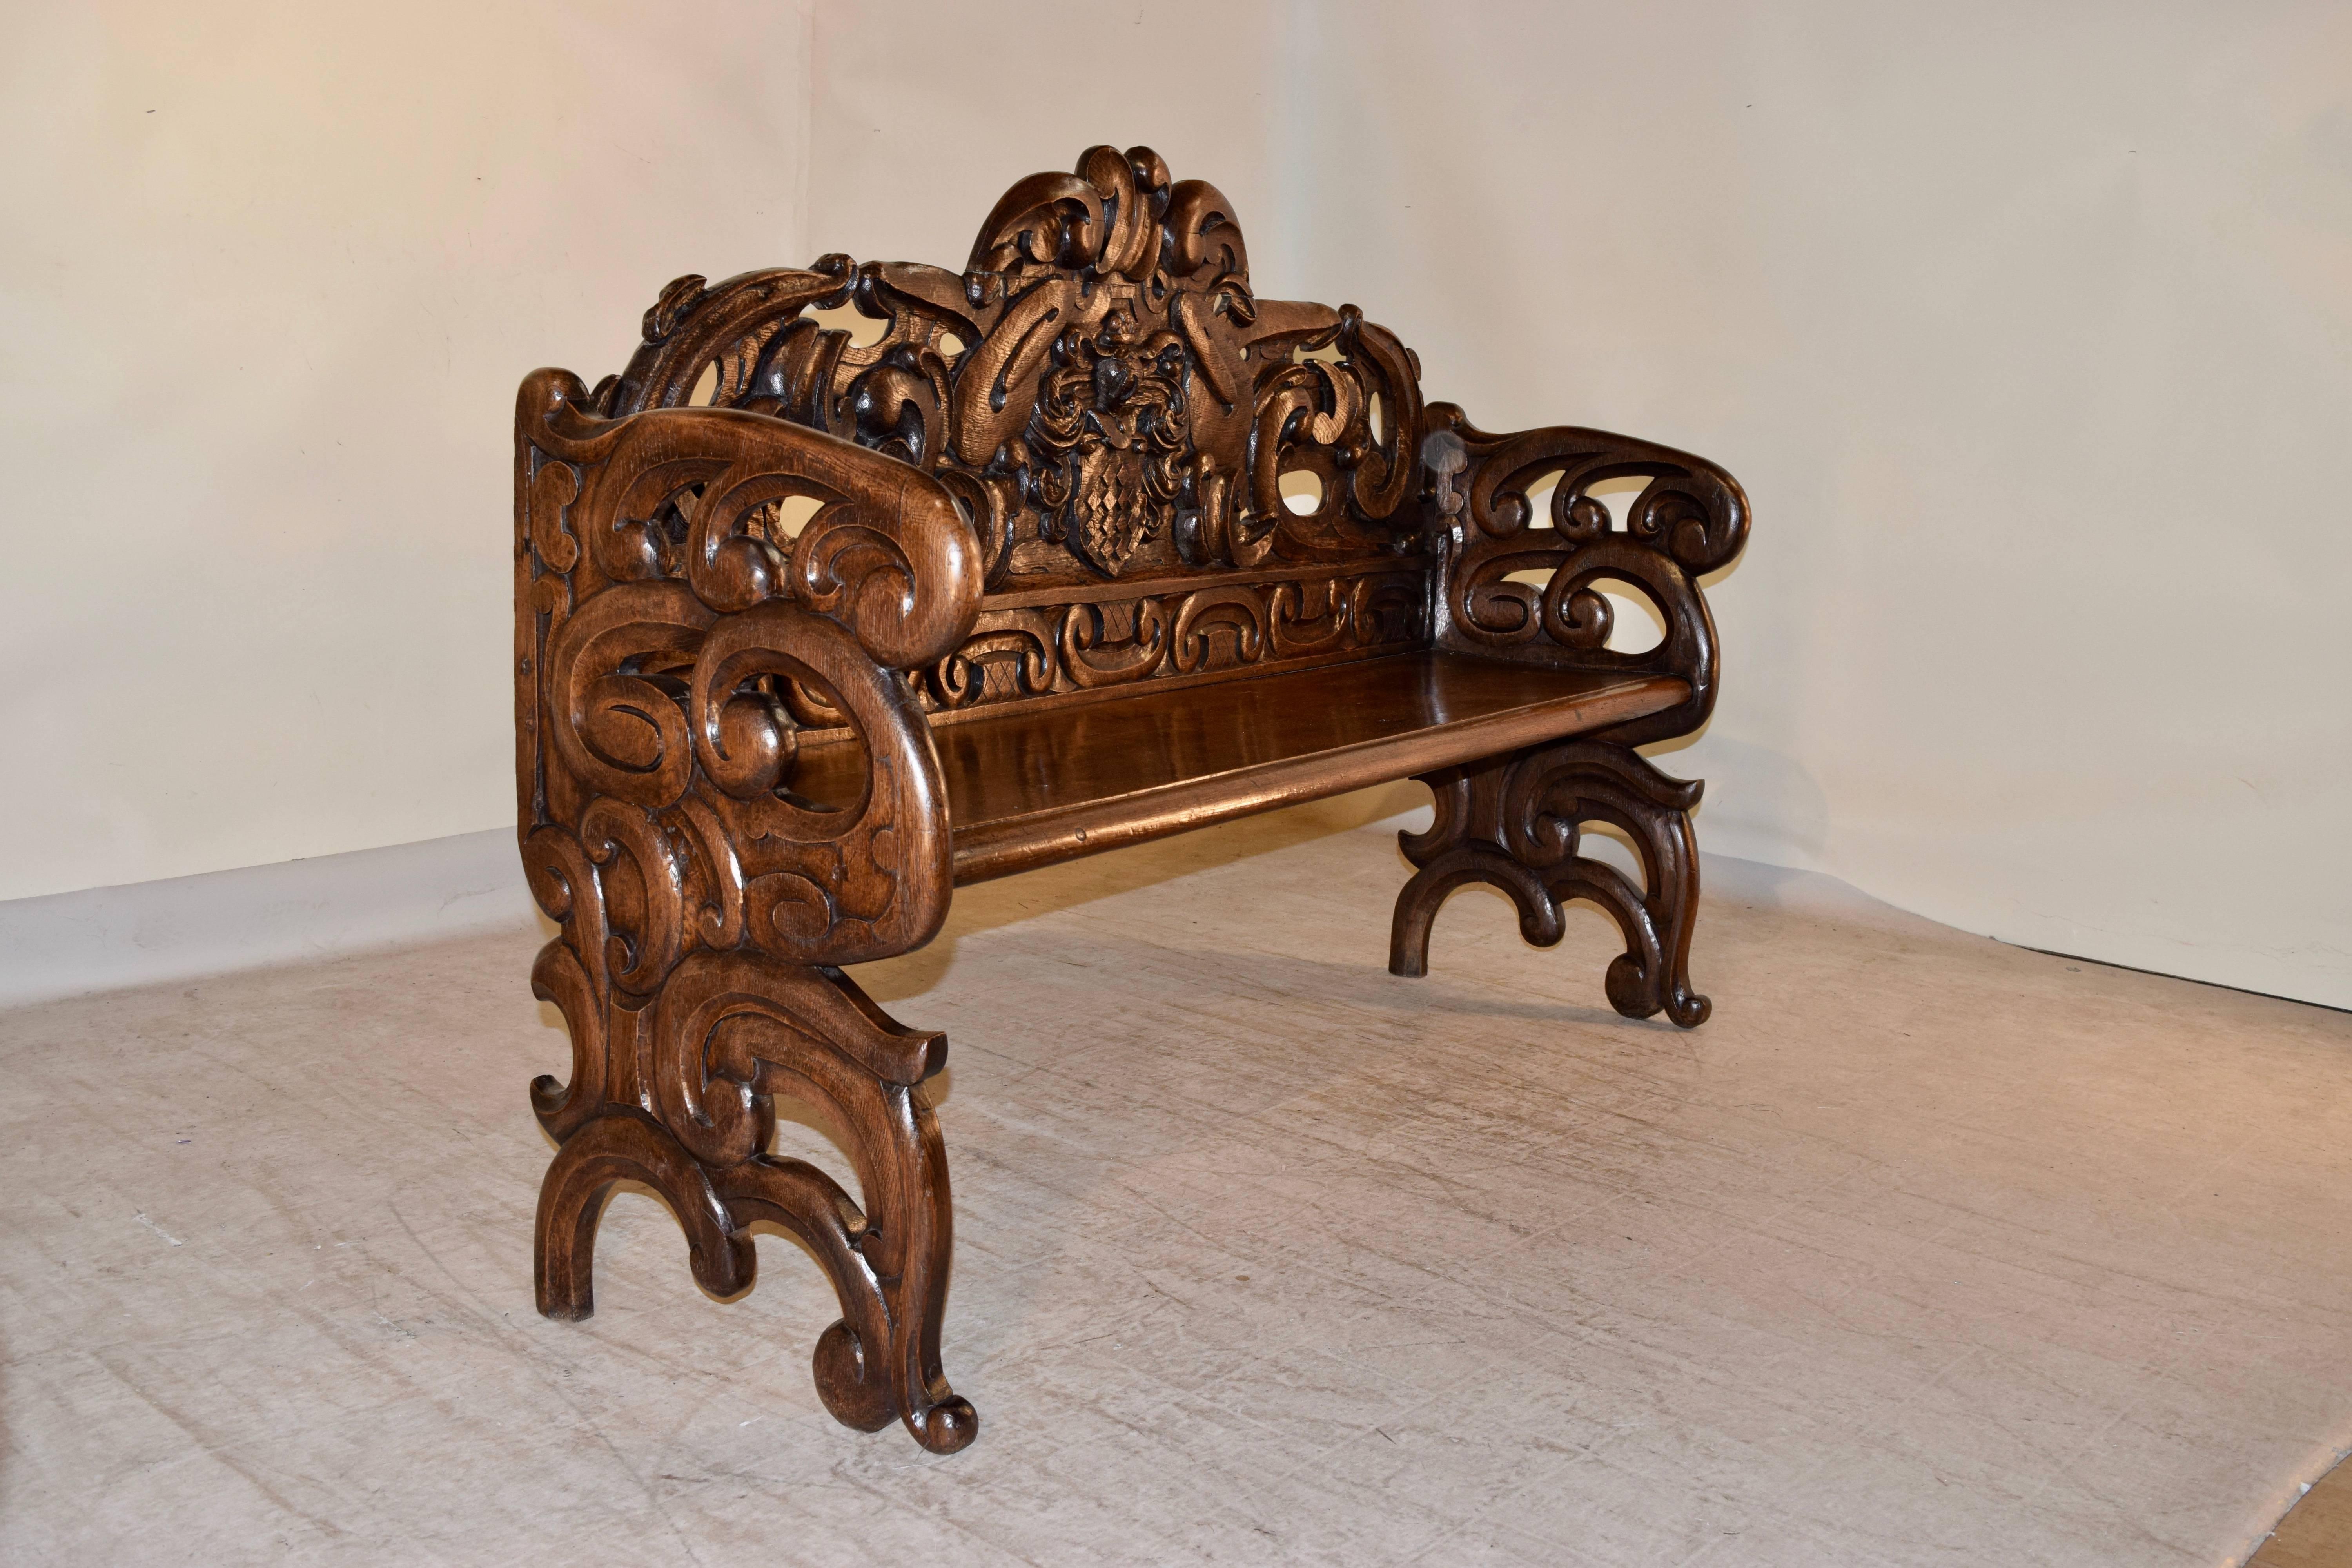 19th century French bench made from oak. The back is exquisitely hand-carved with a central coat of arms, surrounded by decorative carvings. The sides are made up of matching decorative pierced carvings. The seat has a beveled front edge, and the